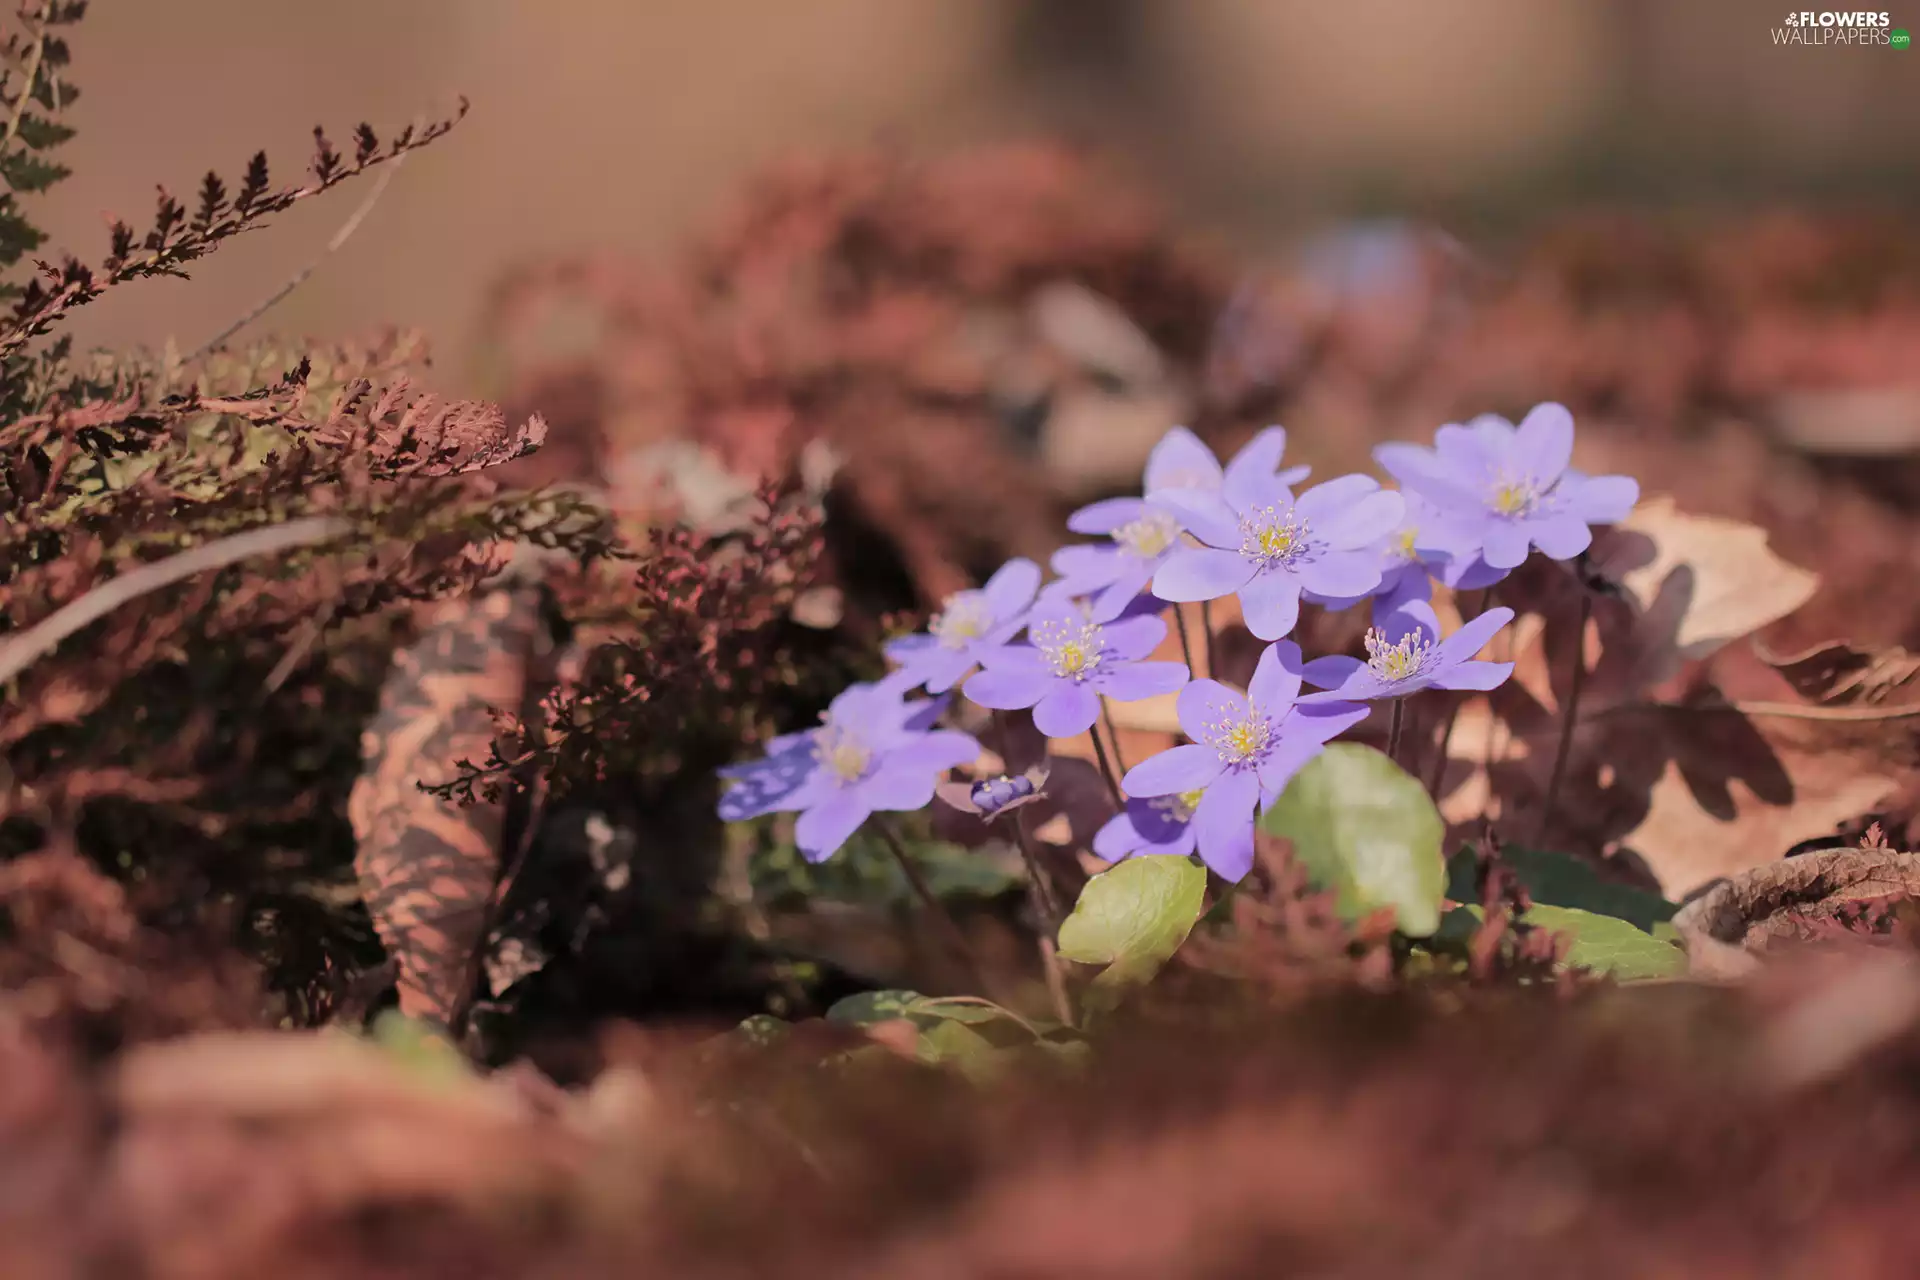 Flowers, lilac, dry, Plants, cluster, Liverworts